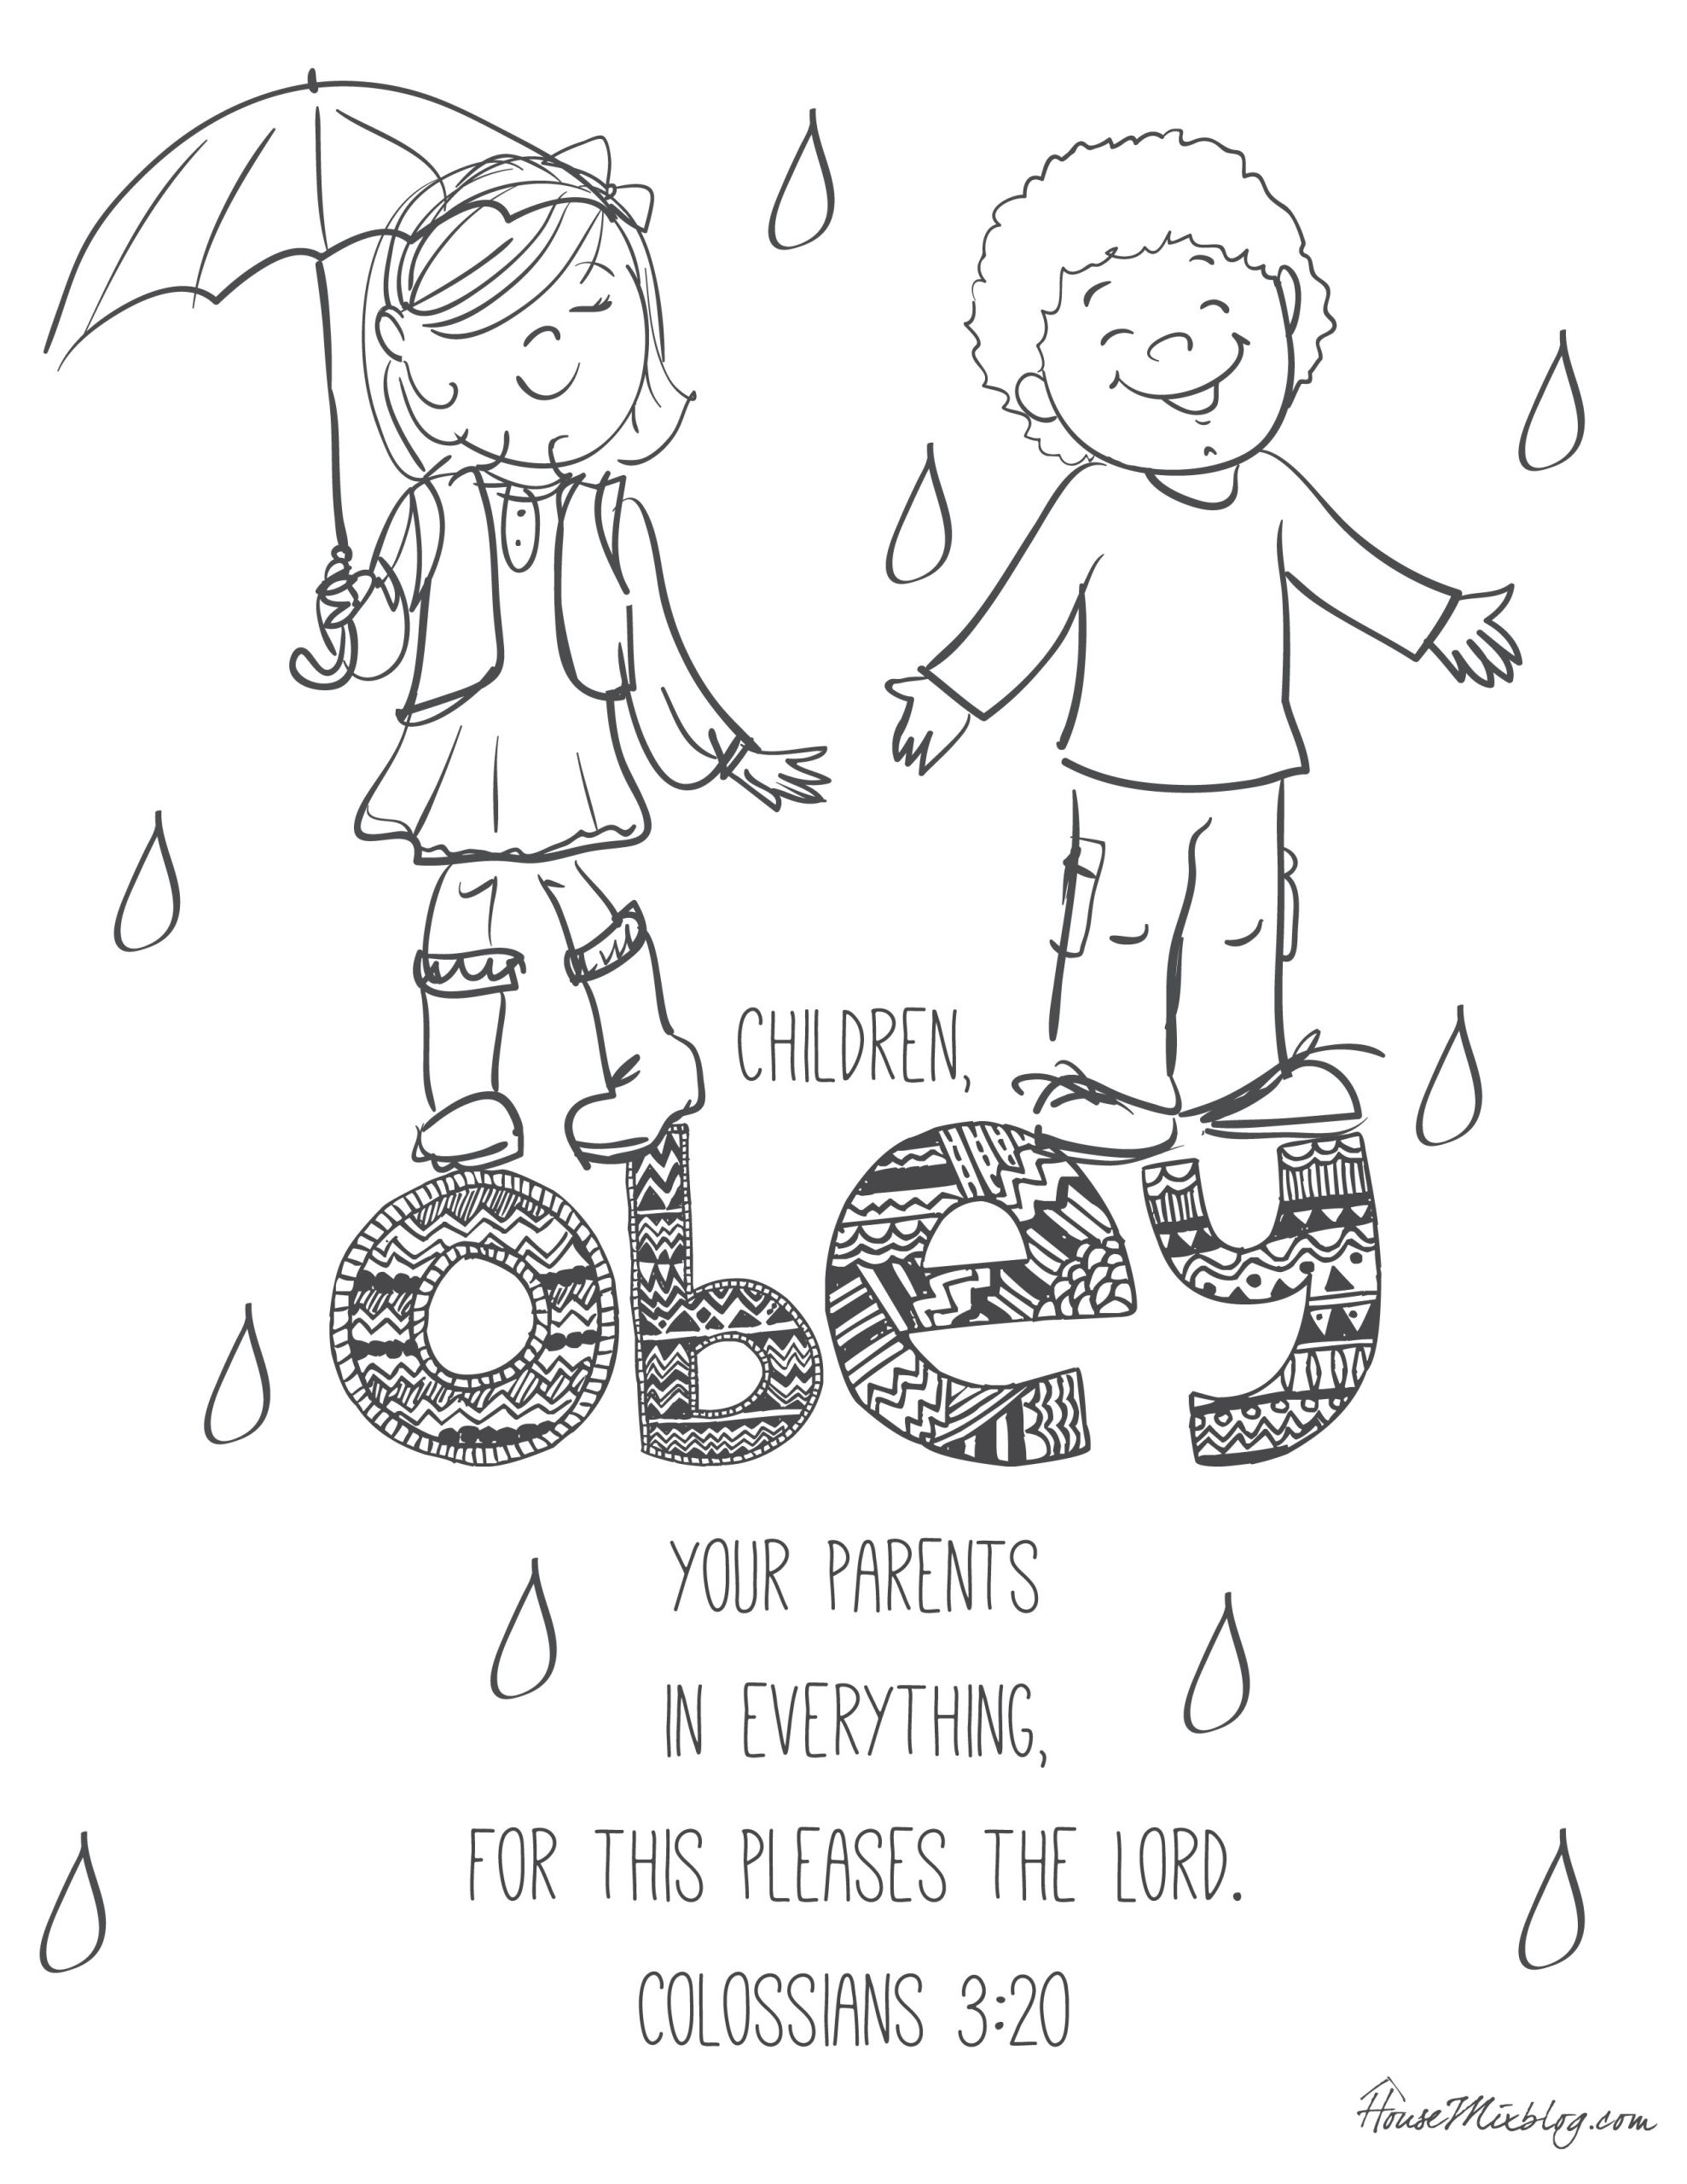 Children Obey Your Parents Coloring Page
 11 Bible verses to teach kids with printables to color